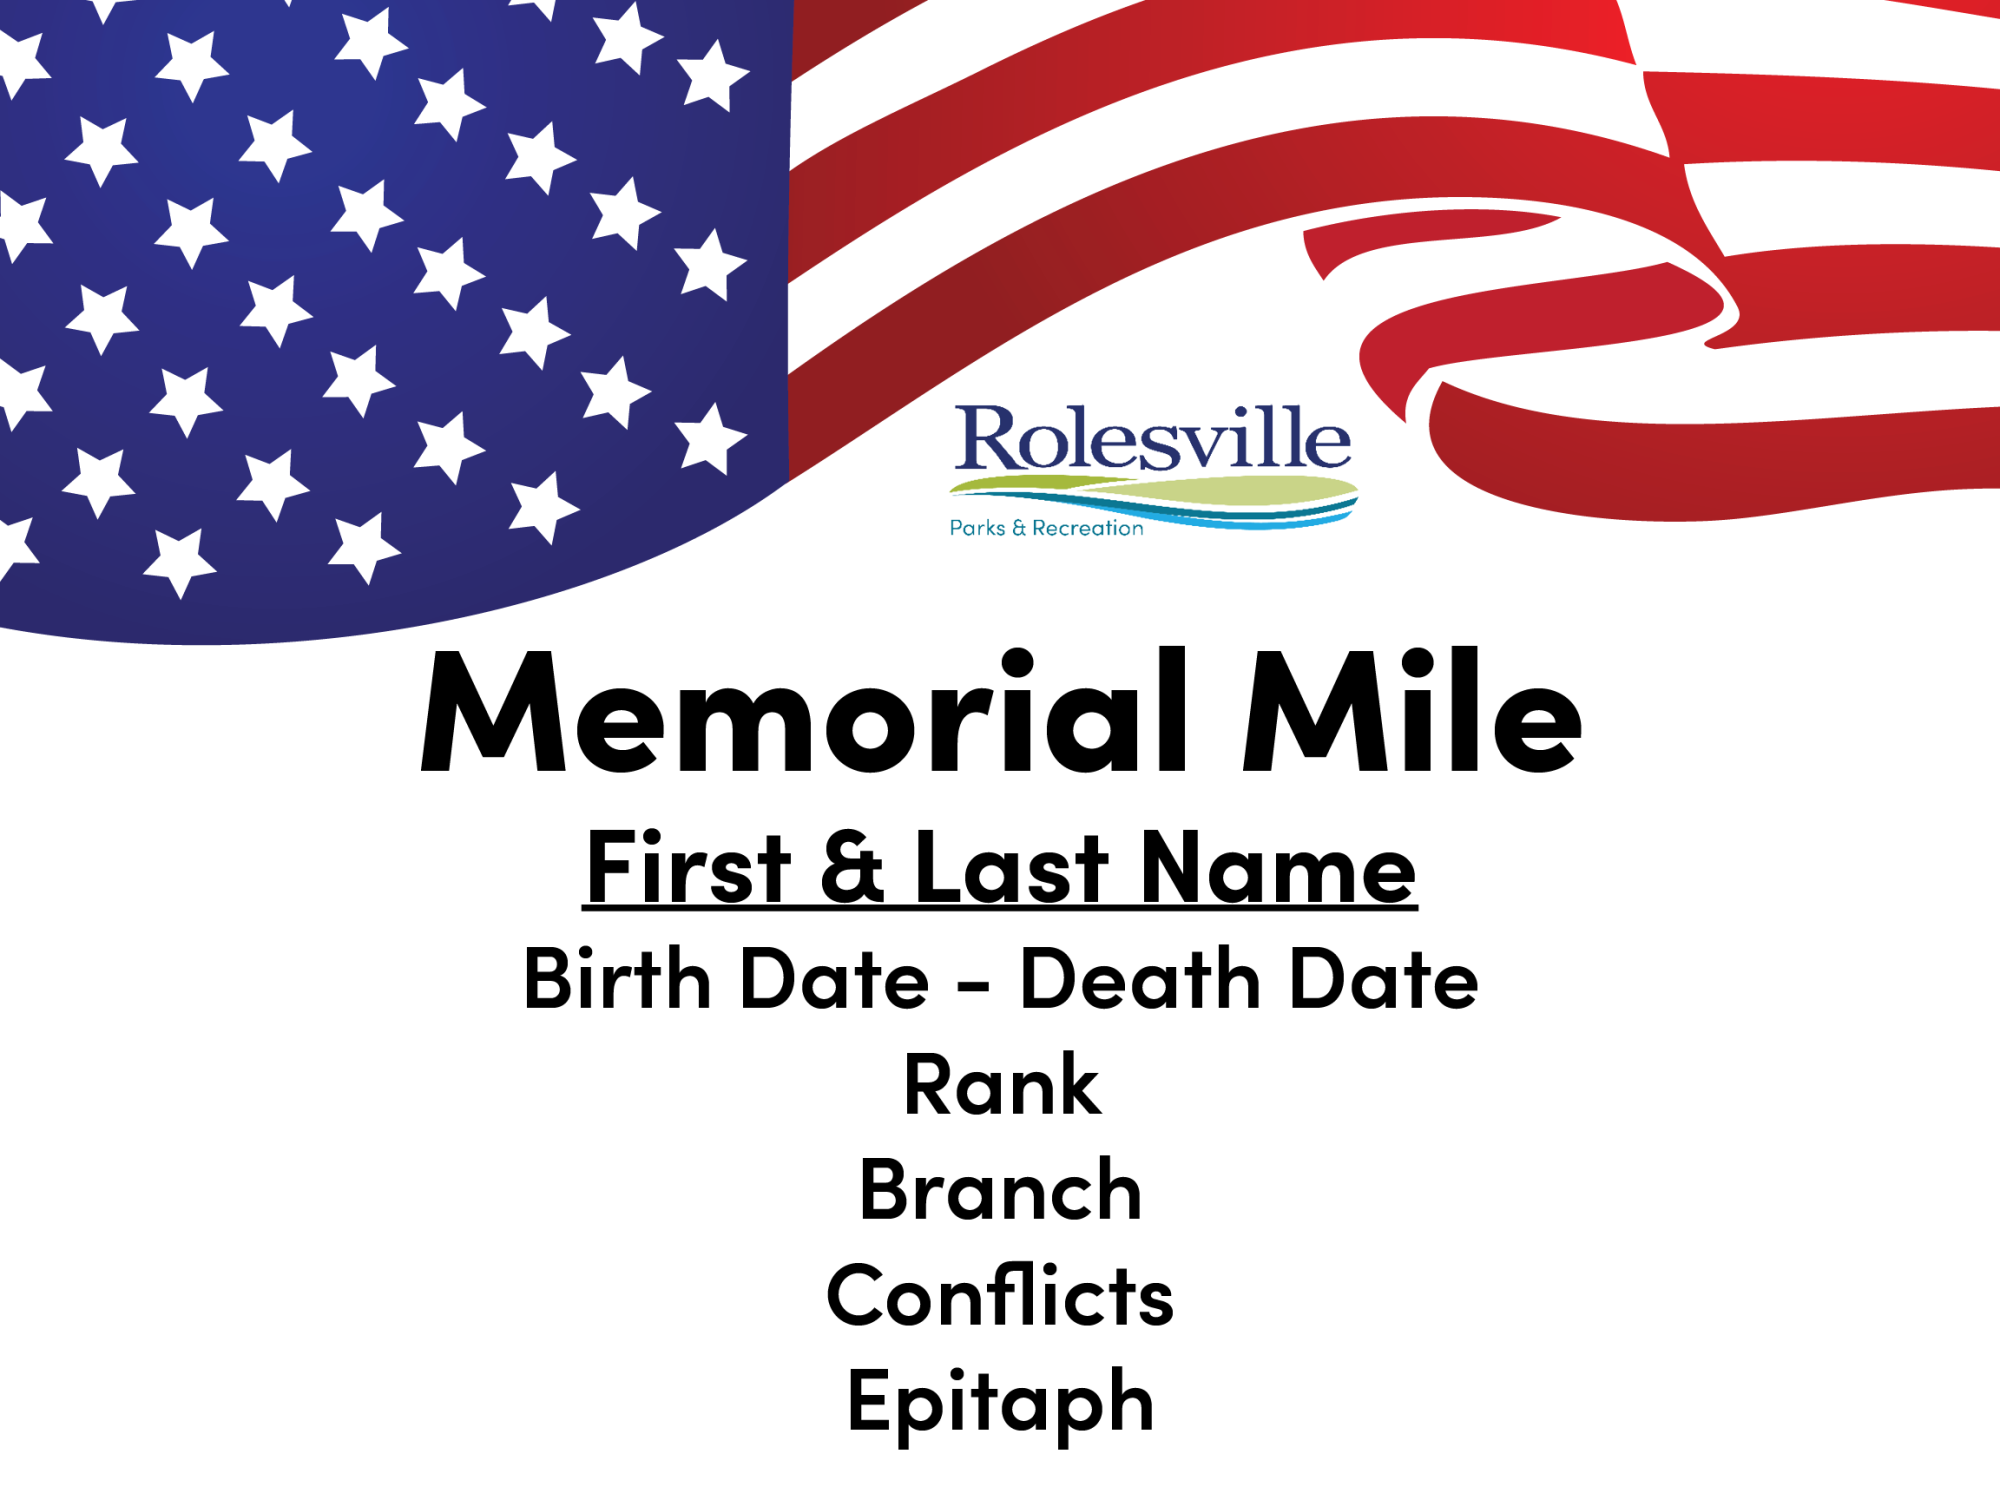 Memorial Mile Form Layout 2